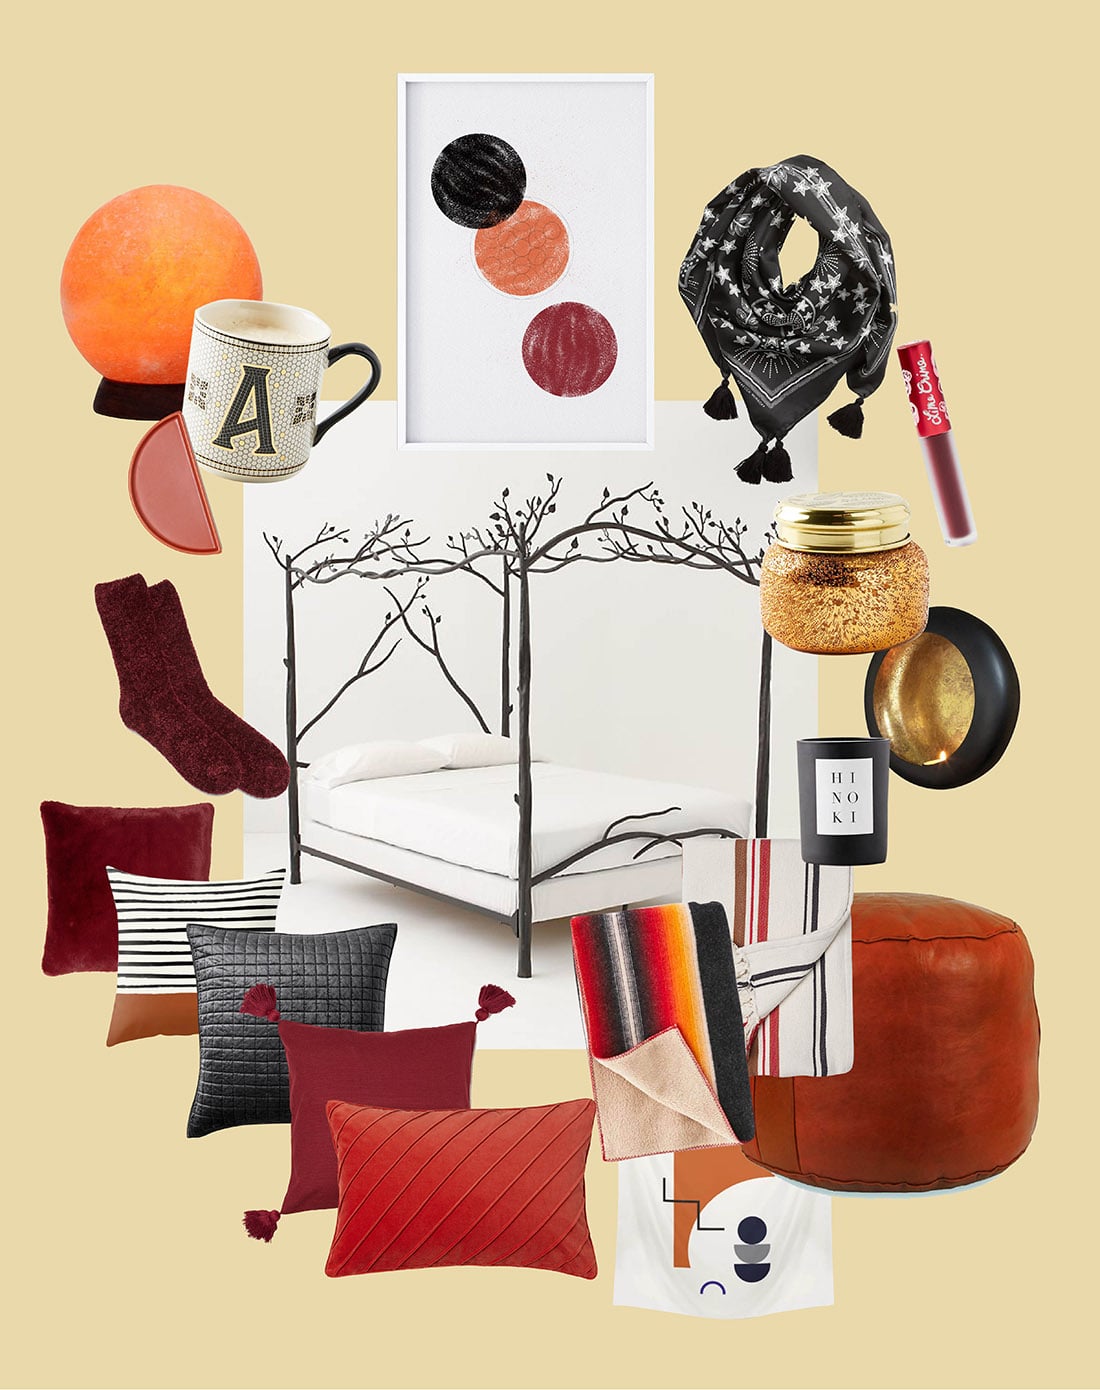 Harvest Moon: A Fall Gift Guide • Little Gold Pixel • In which I round up 20 cozy items in a fall gift guide that invokes that Harvest Moon vibe. Decor in seasonal shades of dark red, orange and black.